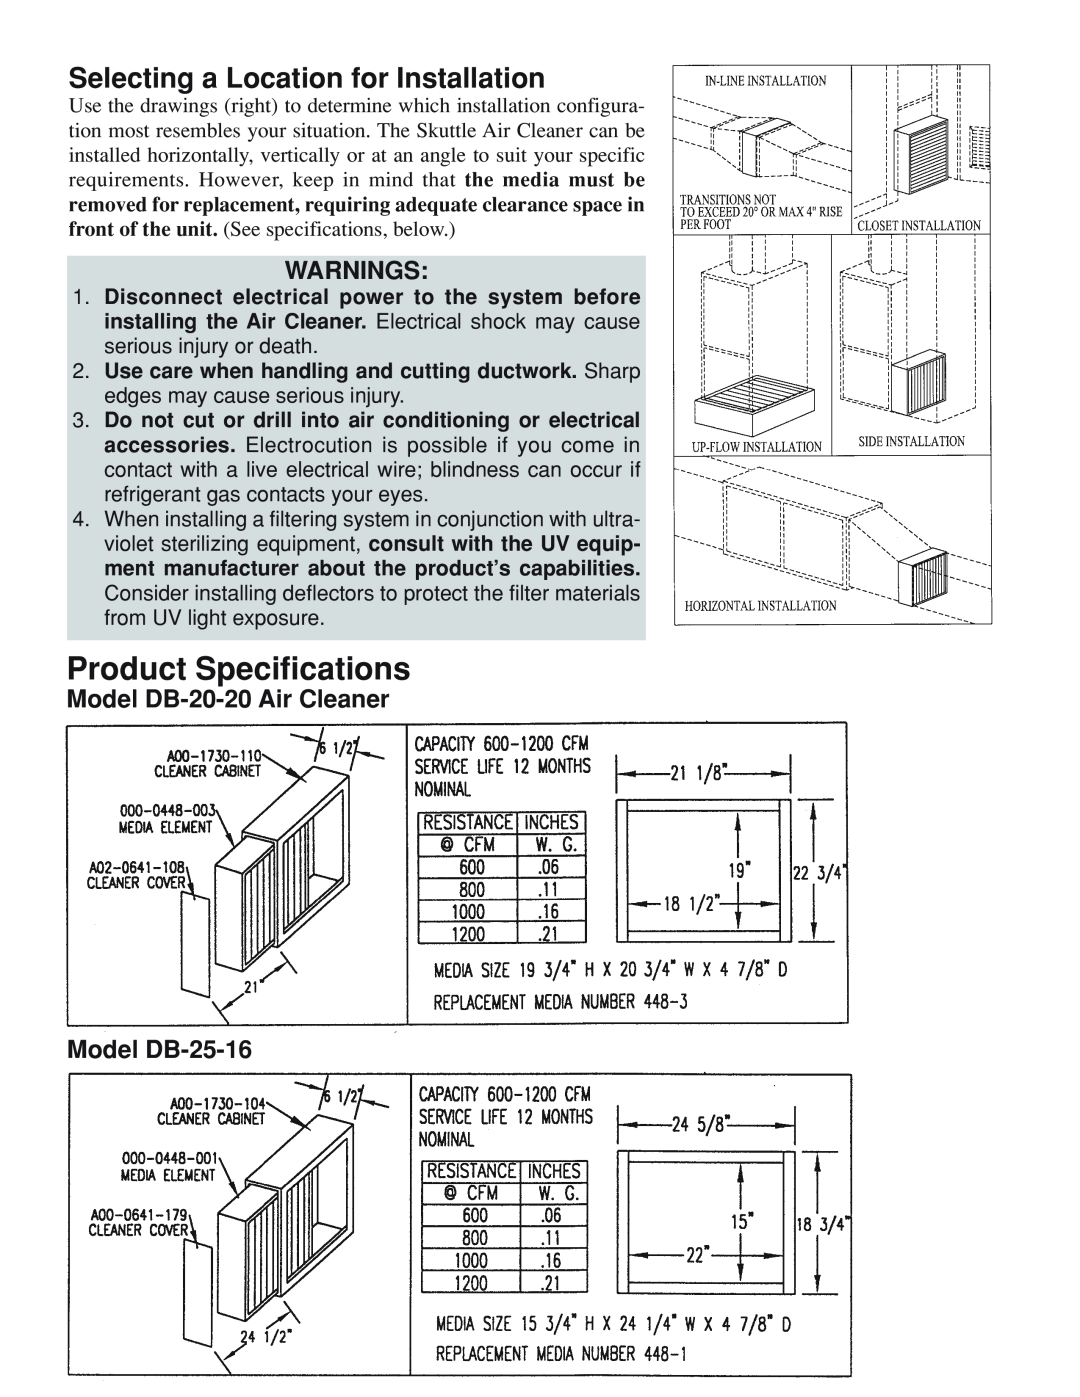 Skuttle Indoor Air Quality Products Air Cleaner Product Specifications, Selecting a Location for Installation, Warnings 